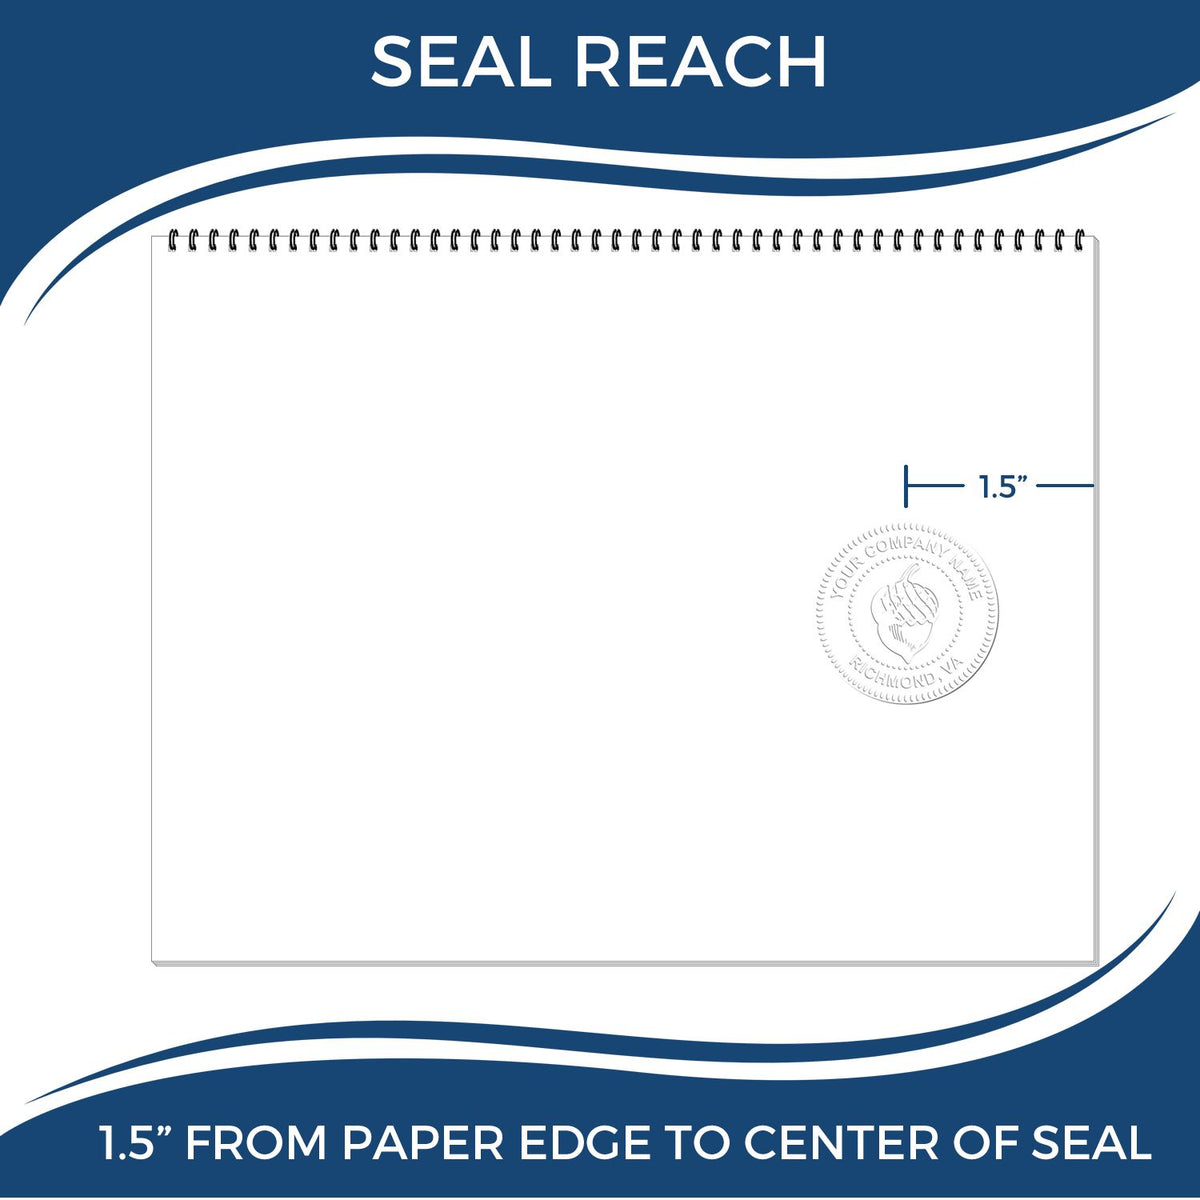 An infographic showing the seal reach which is represented by a ruler and a miniature seal image of the Hybrid Wyoming Engineer Seal